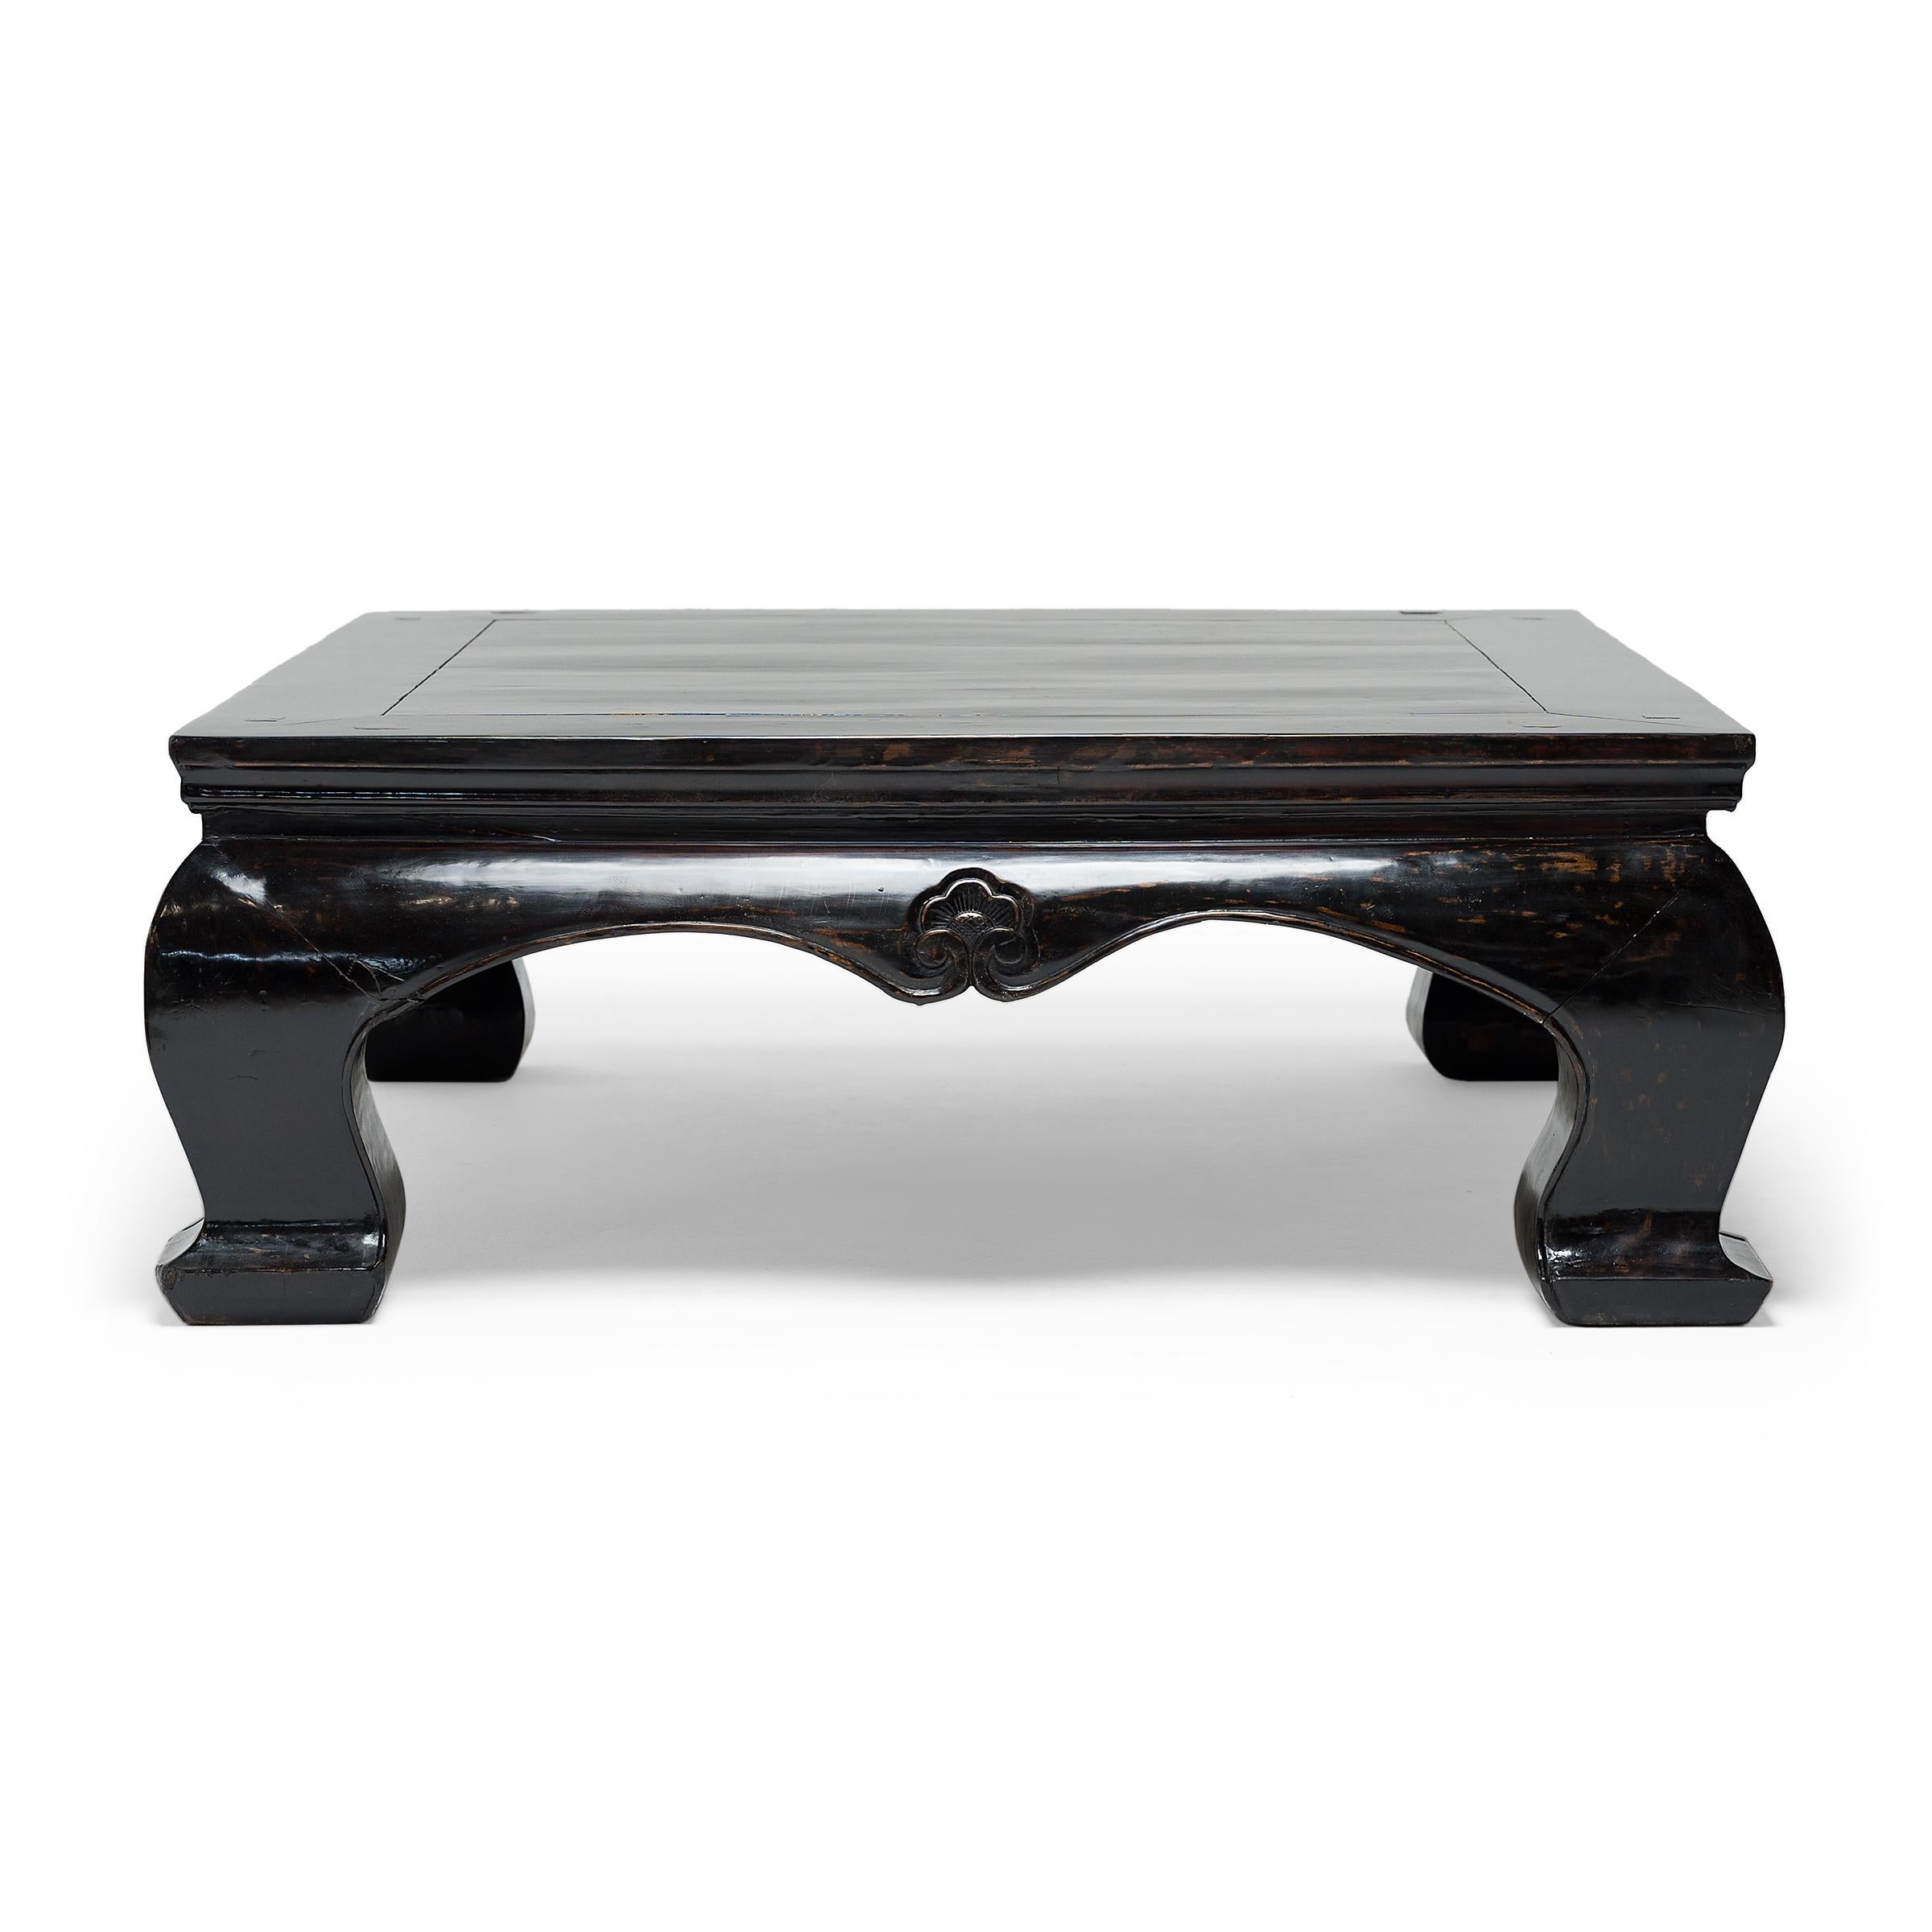 This grand black lacquer table beautifully exemplifies the unique forms of classical Chinese furniture. Constructed in the mid-19th century using traditional joinery methods, the table features a square floating-panel top, a curved waisted apron,